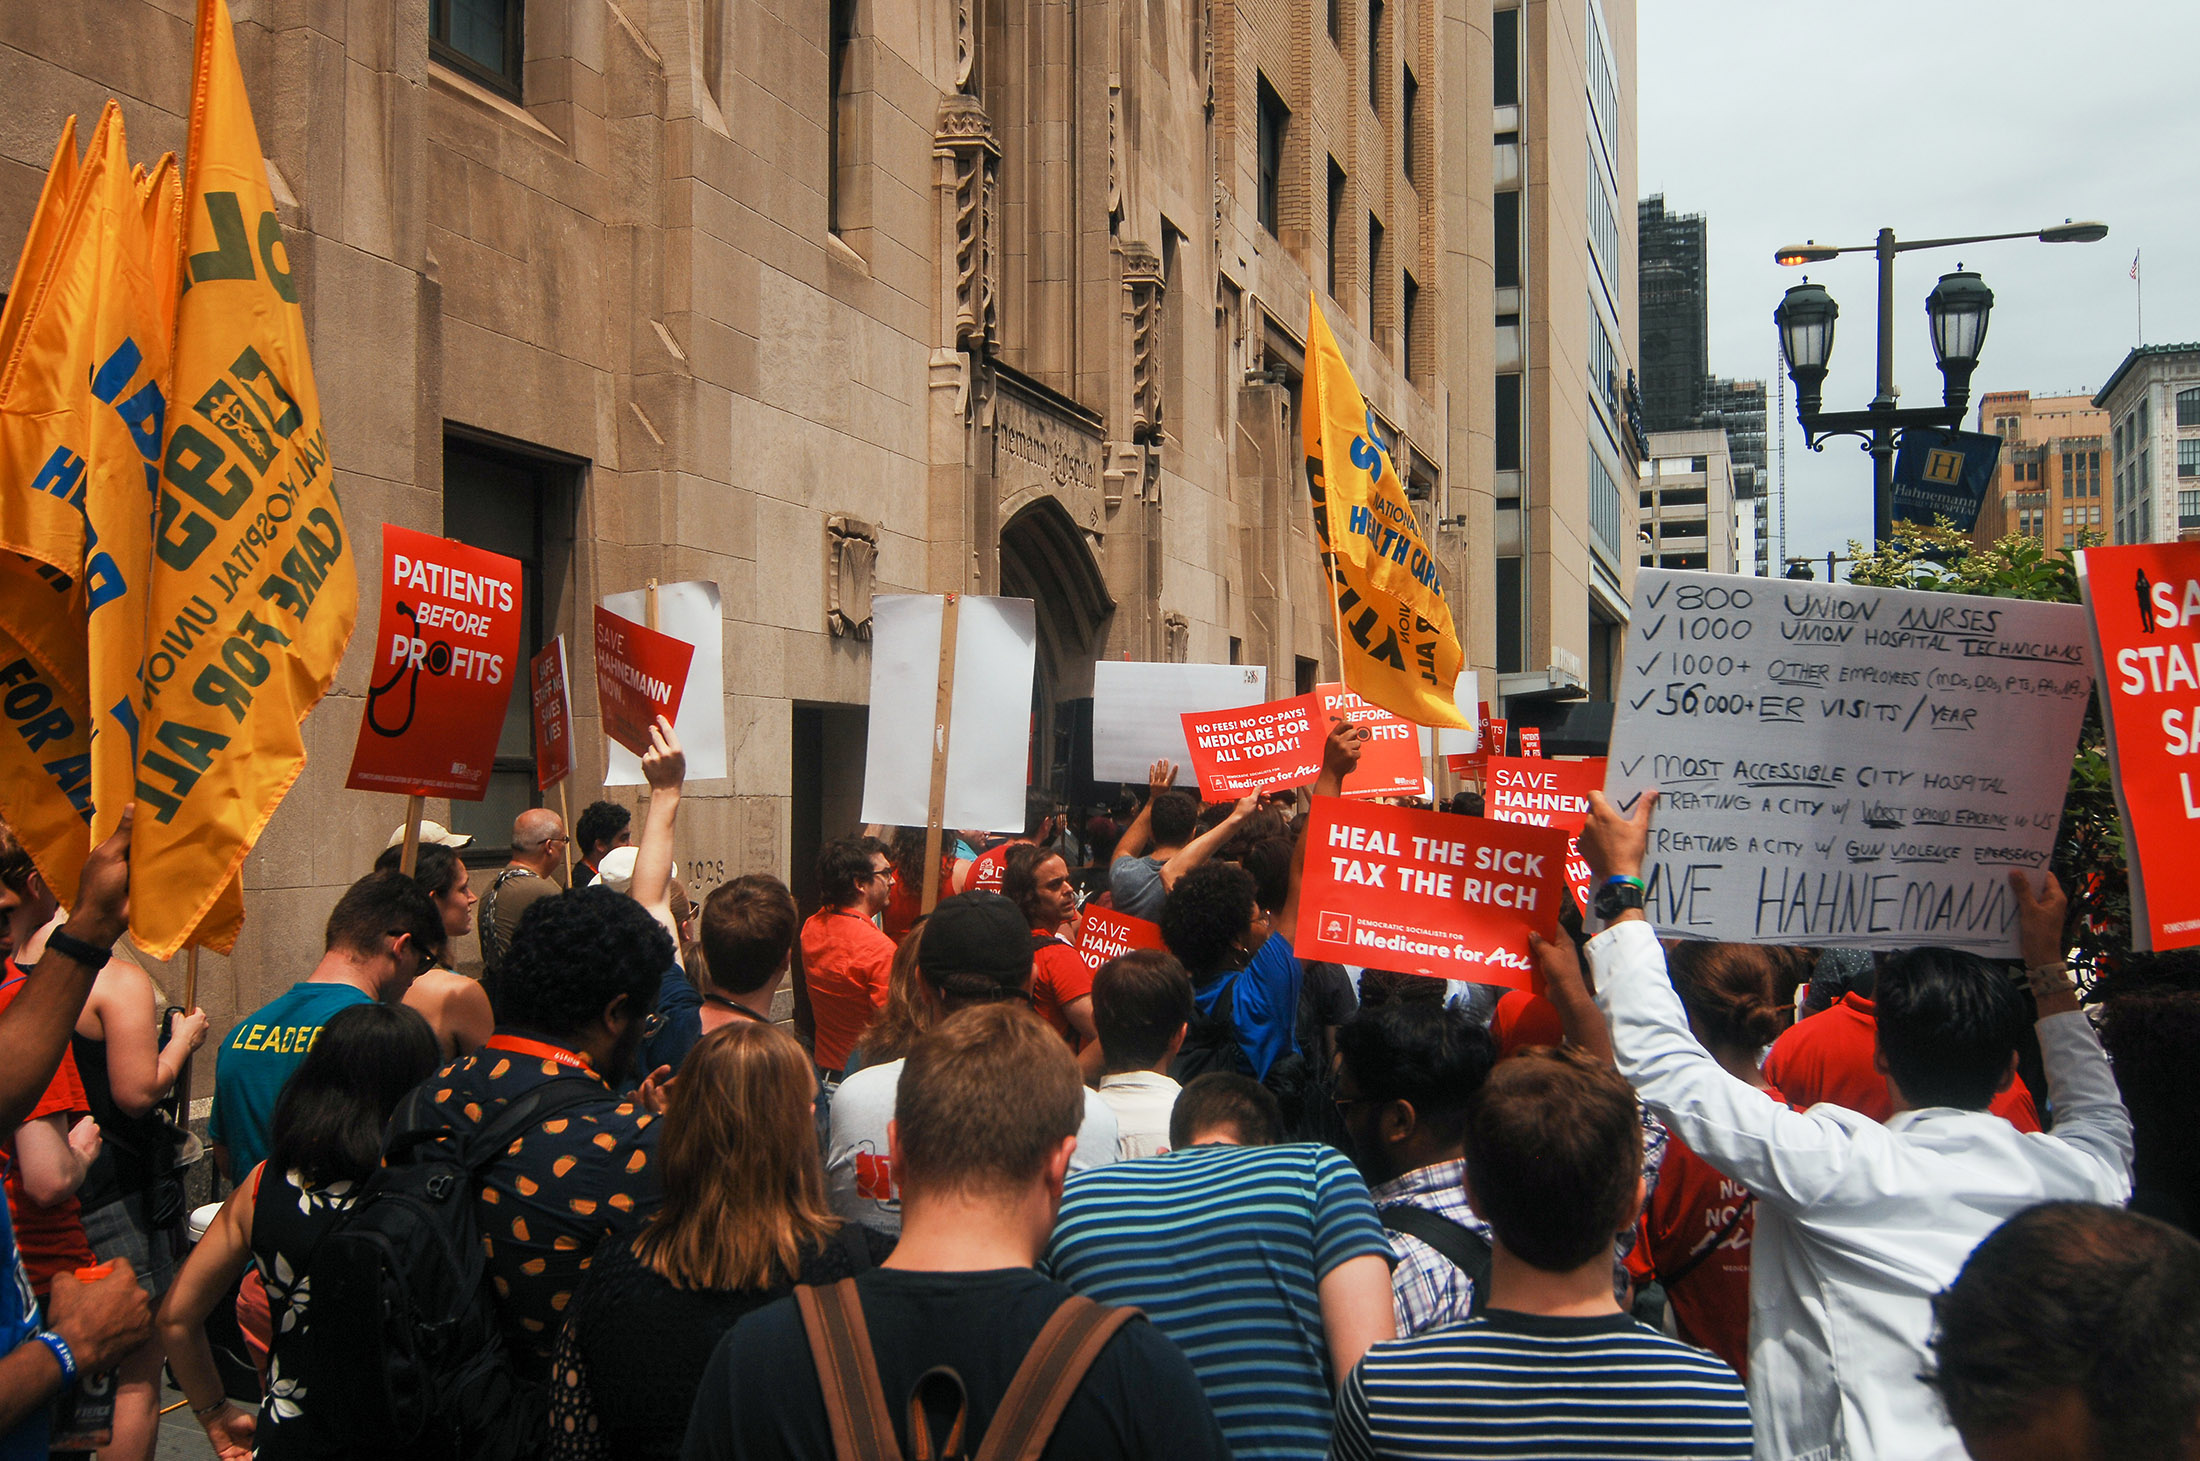 Demonstrators gathered in front of Hahnemann University Hospital to protest its closure and sale on July 11, 2019.